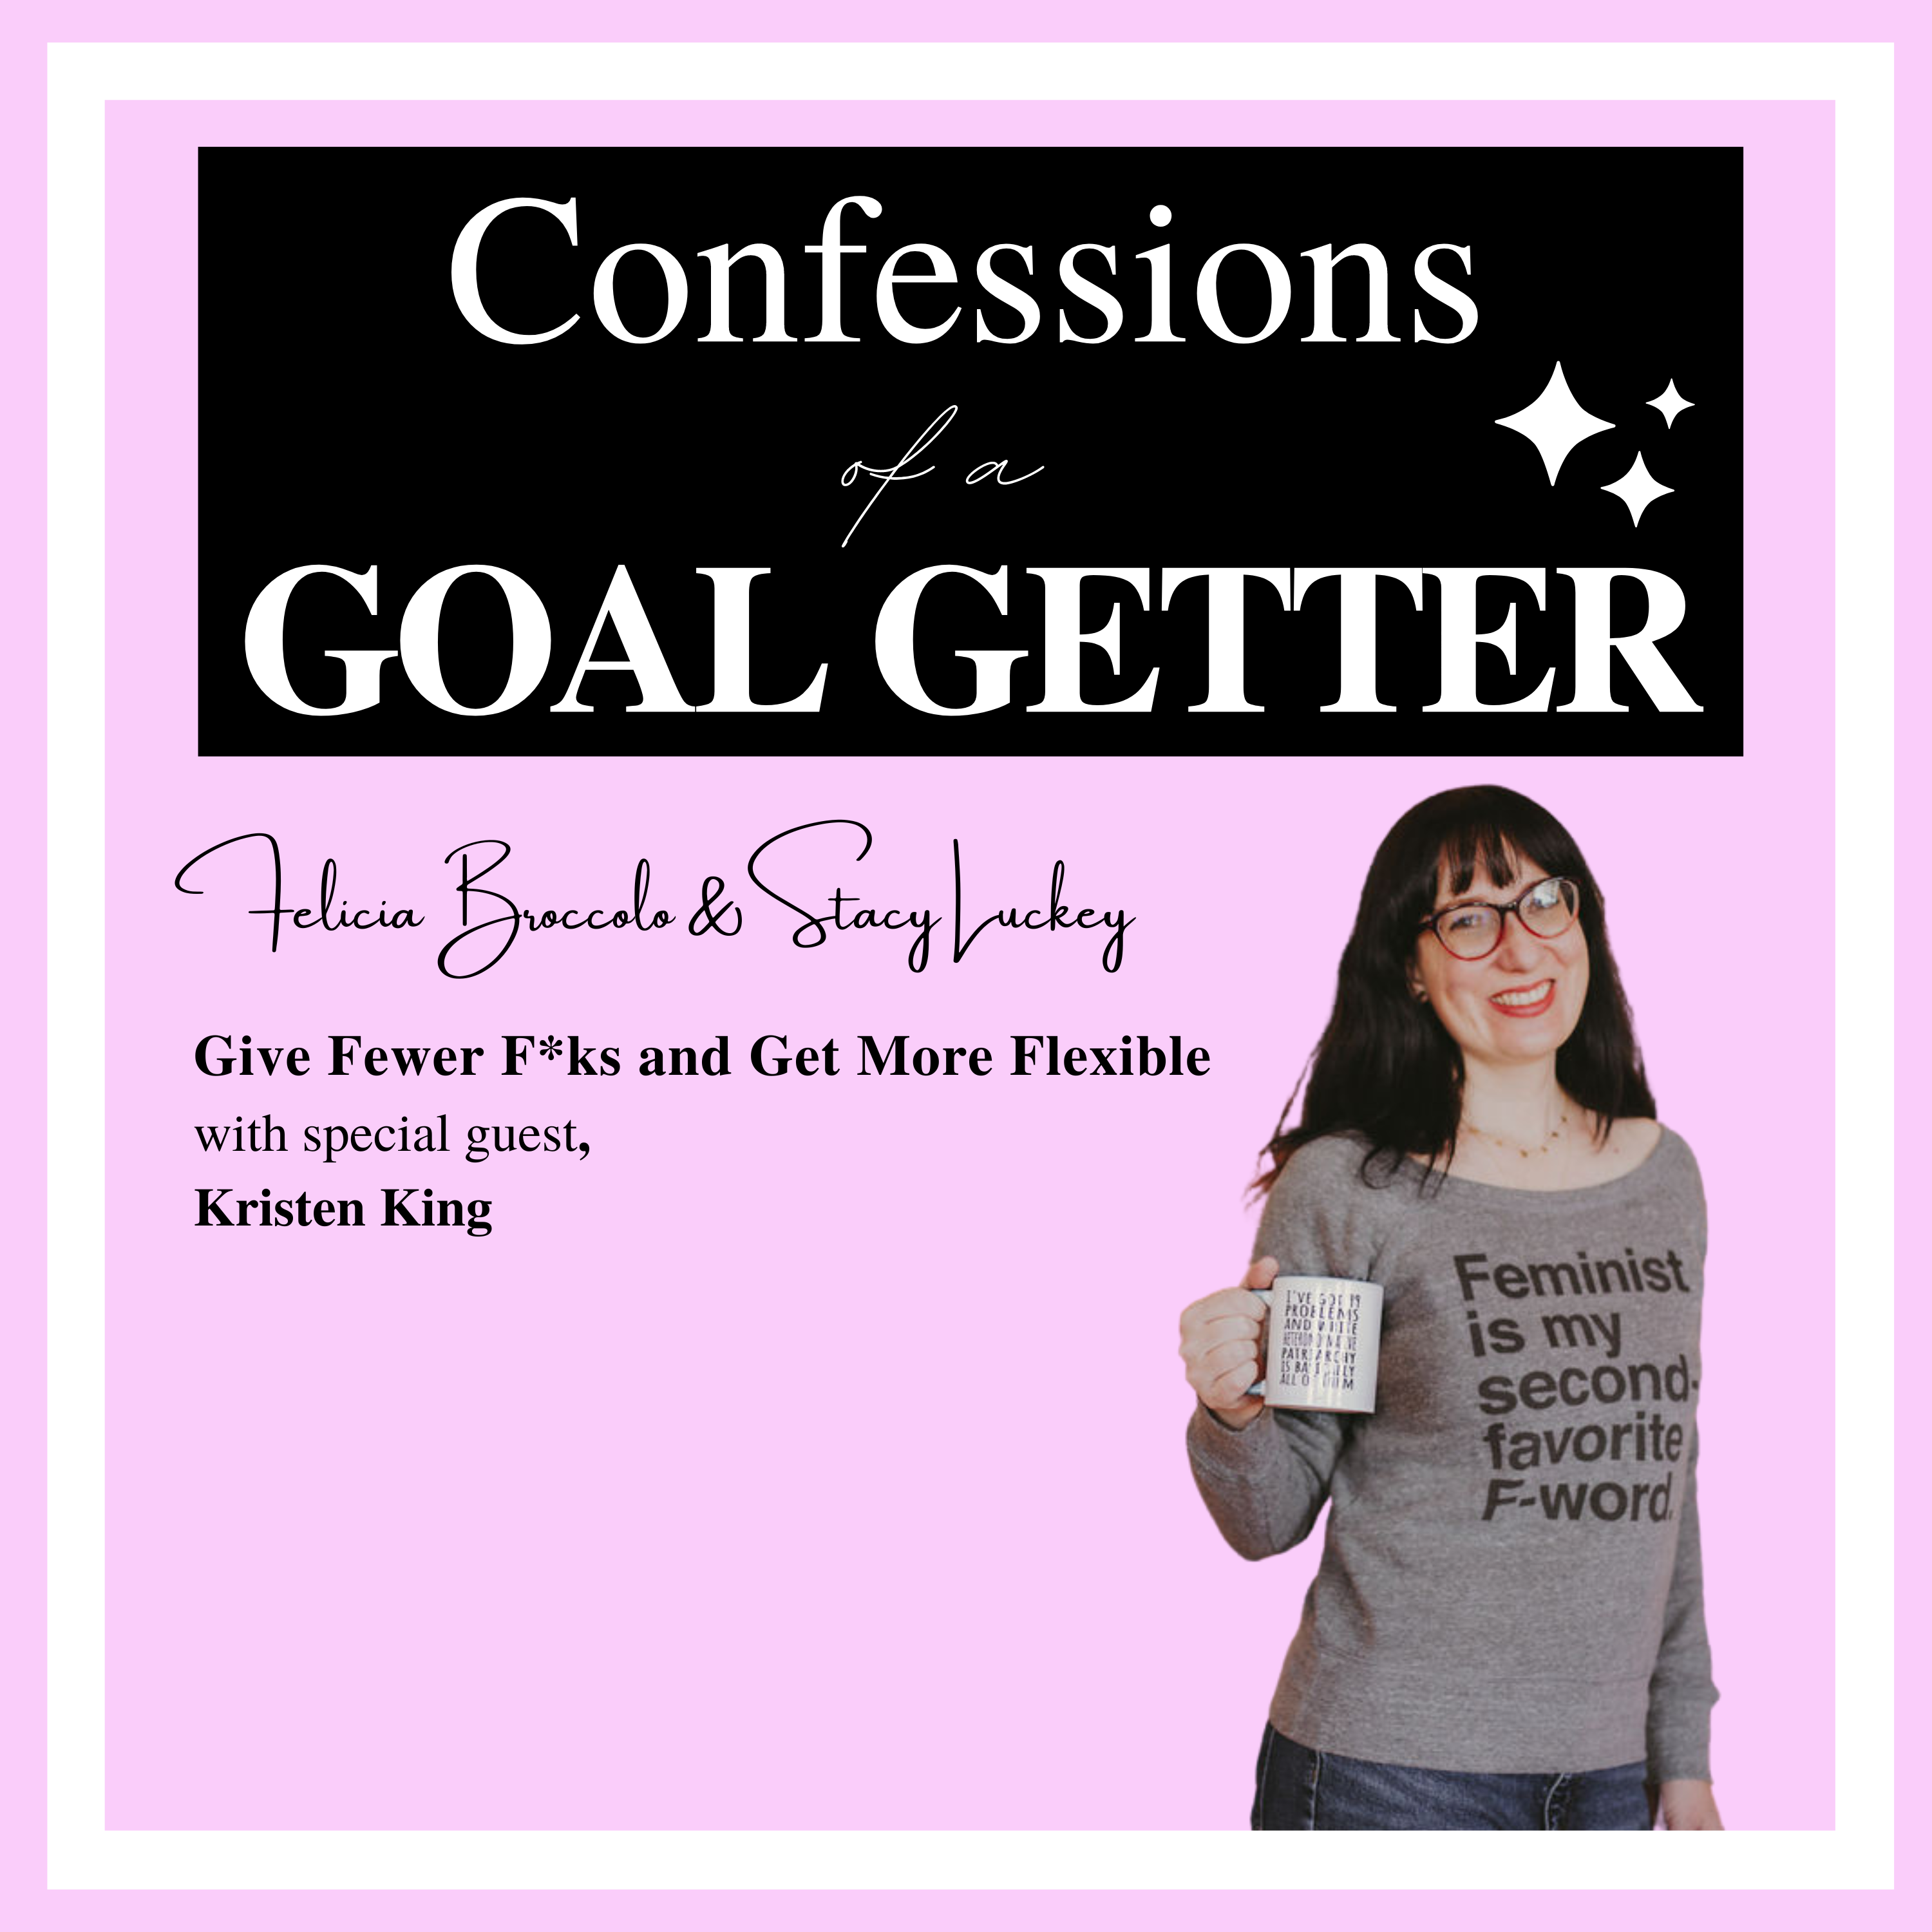 New Interview: Give Fewer F*ks and Get More Flexible on the Confessions of a Goal Getter Podcast